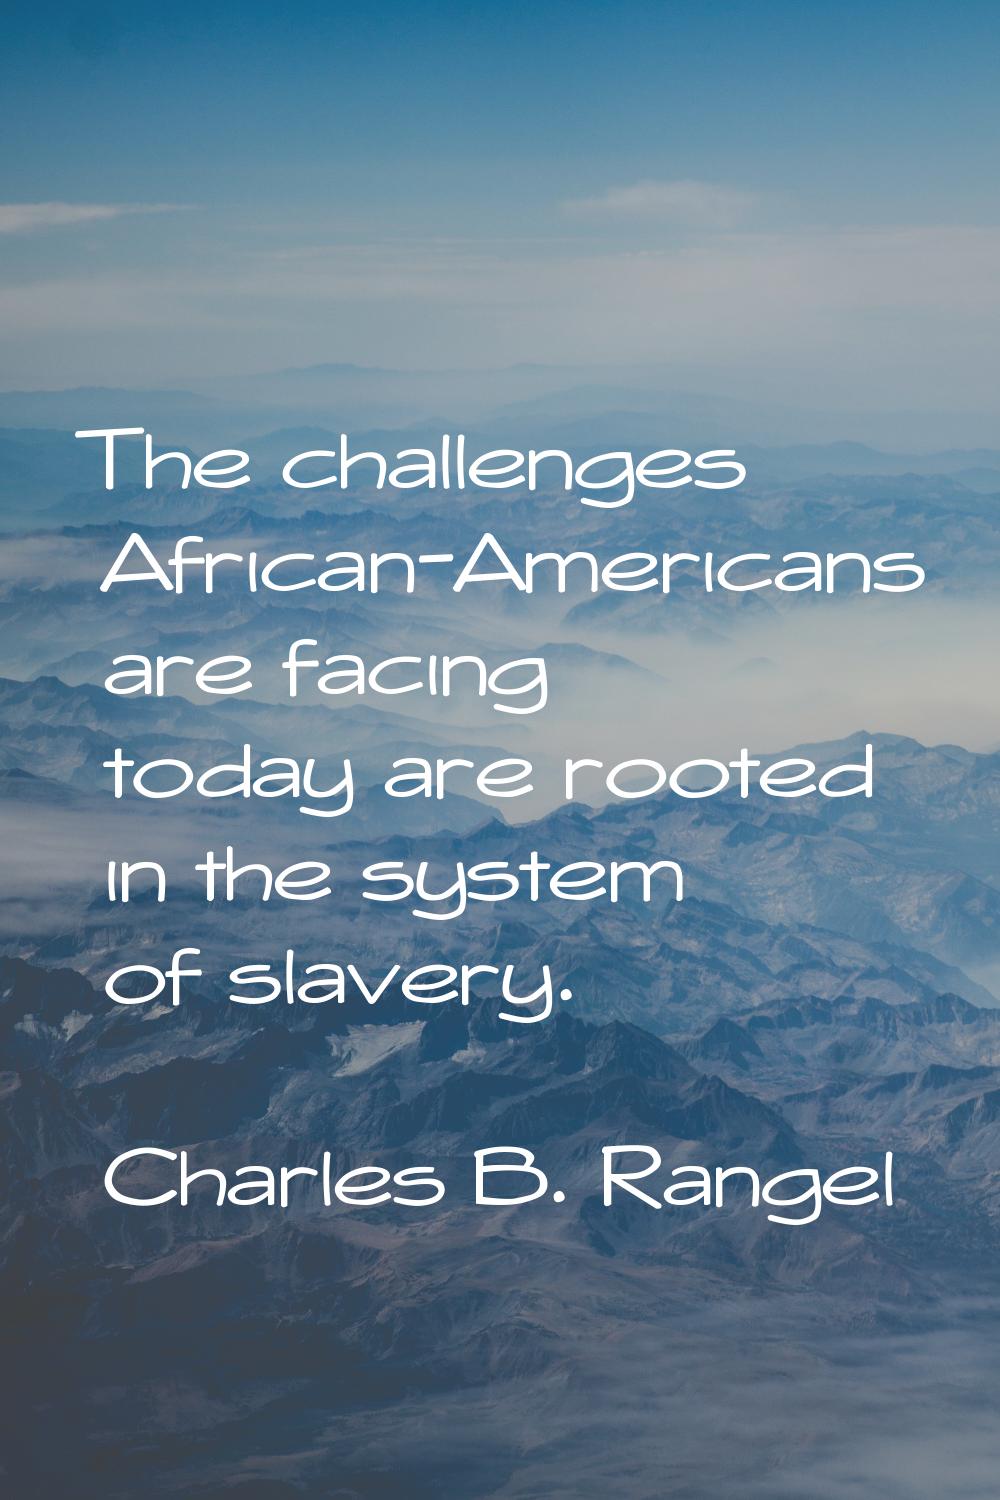 The challenges African-Americans are facing today are rooted in the system of slavery.